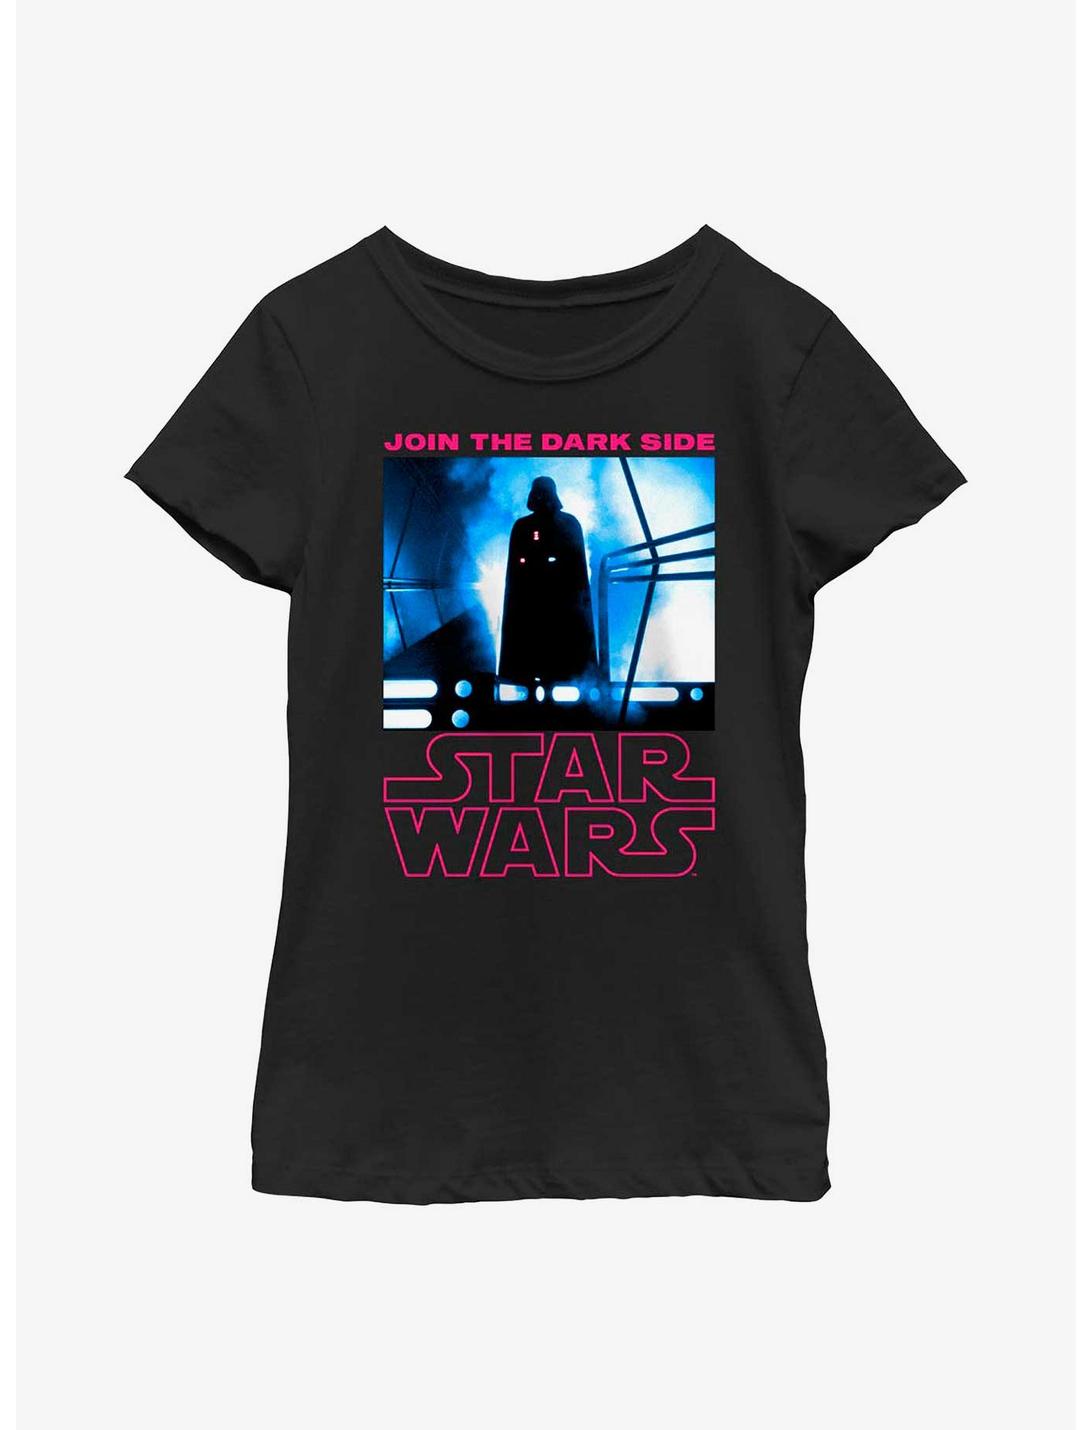 Star Wars Join The Dark Side Youth Girls T-Shirt, BLACK, hi-res